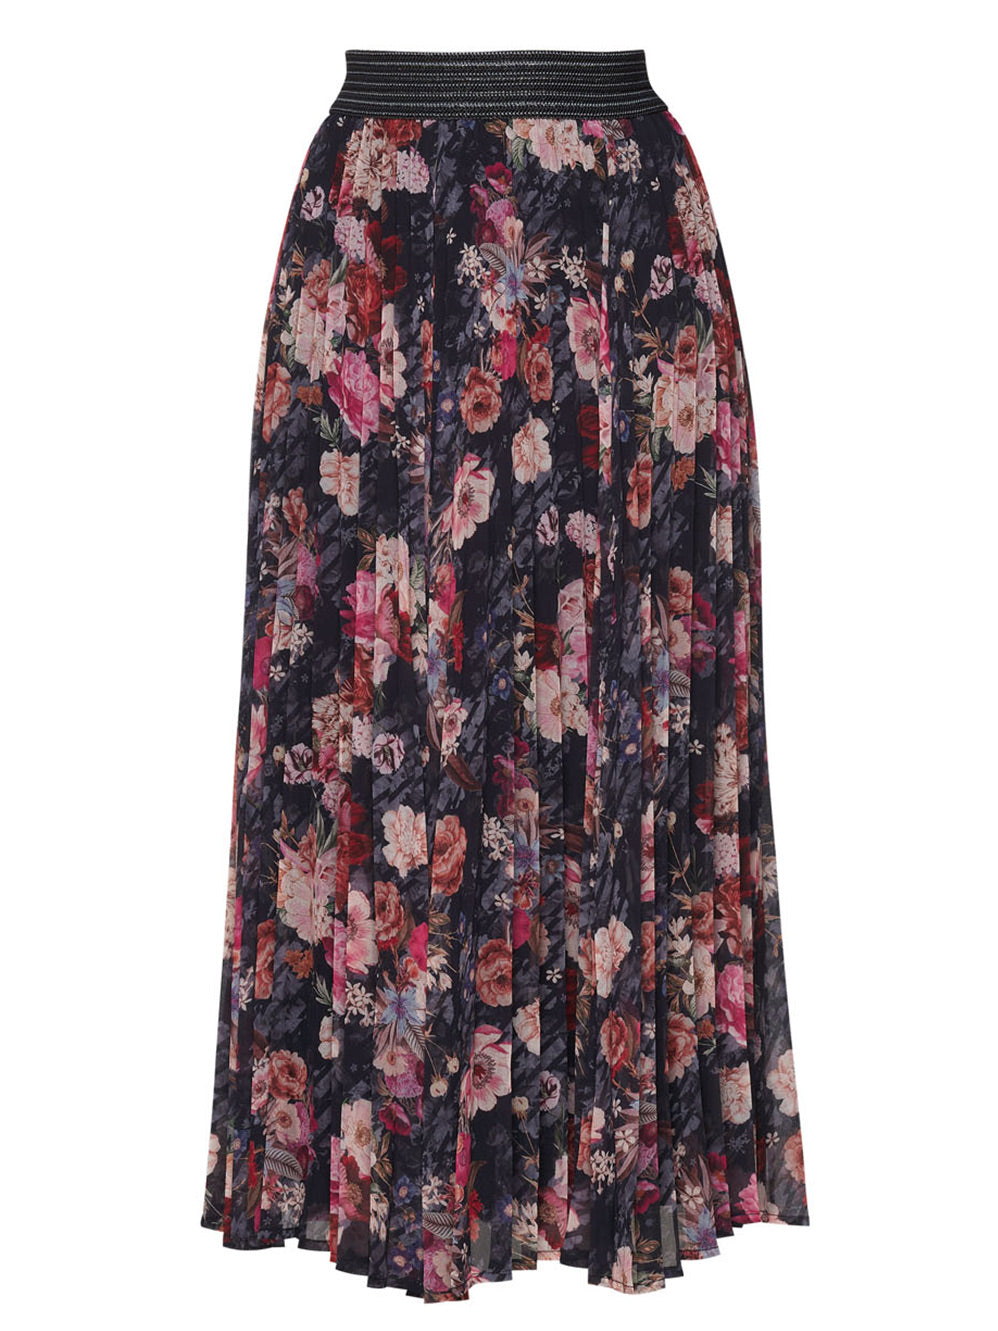 MADLY SWEETLY FLORIENT SKIRT